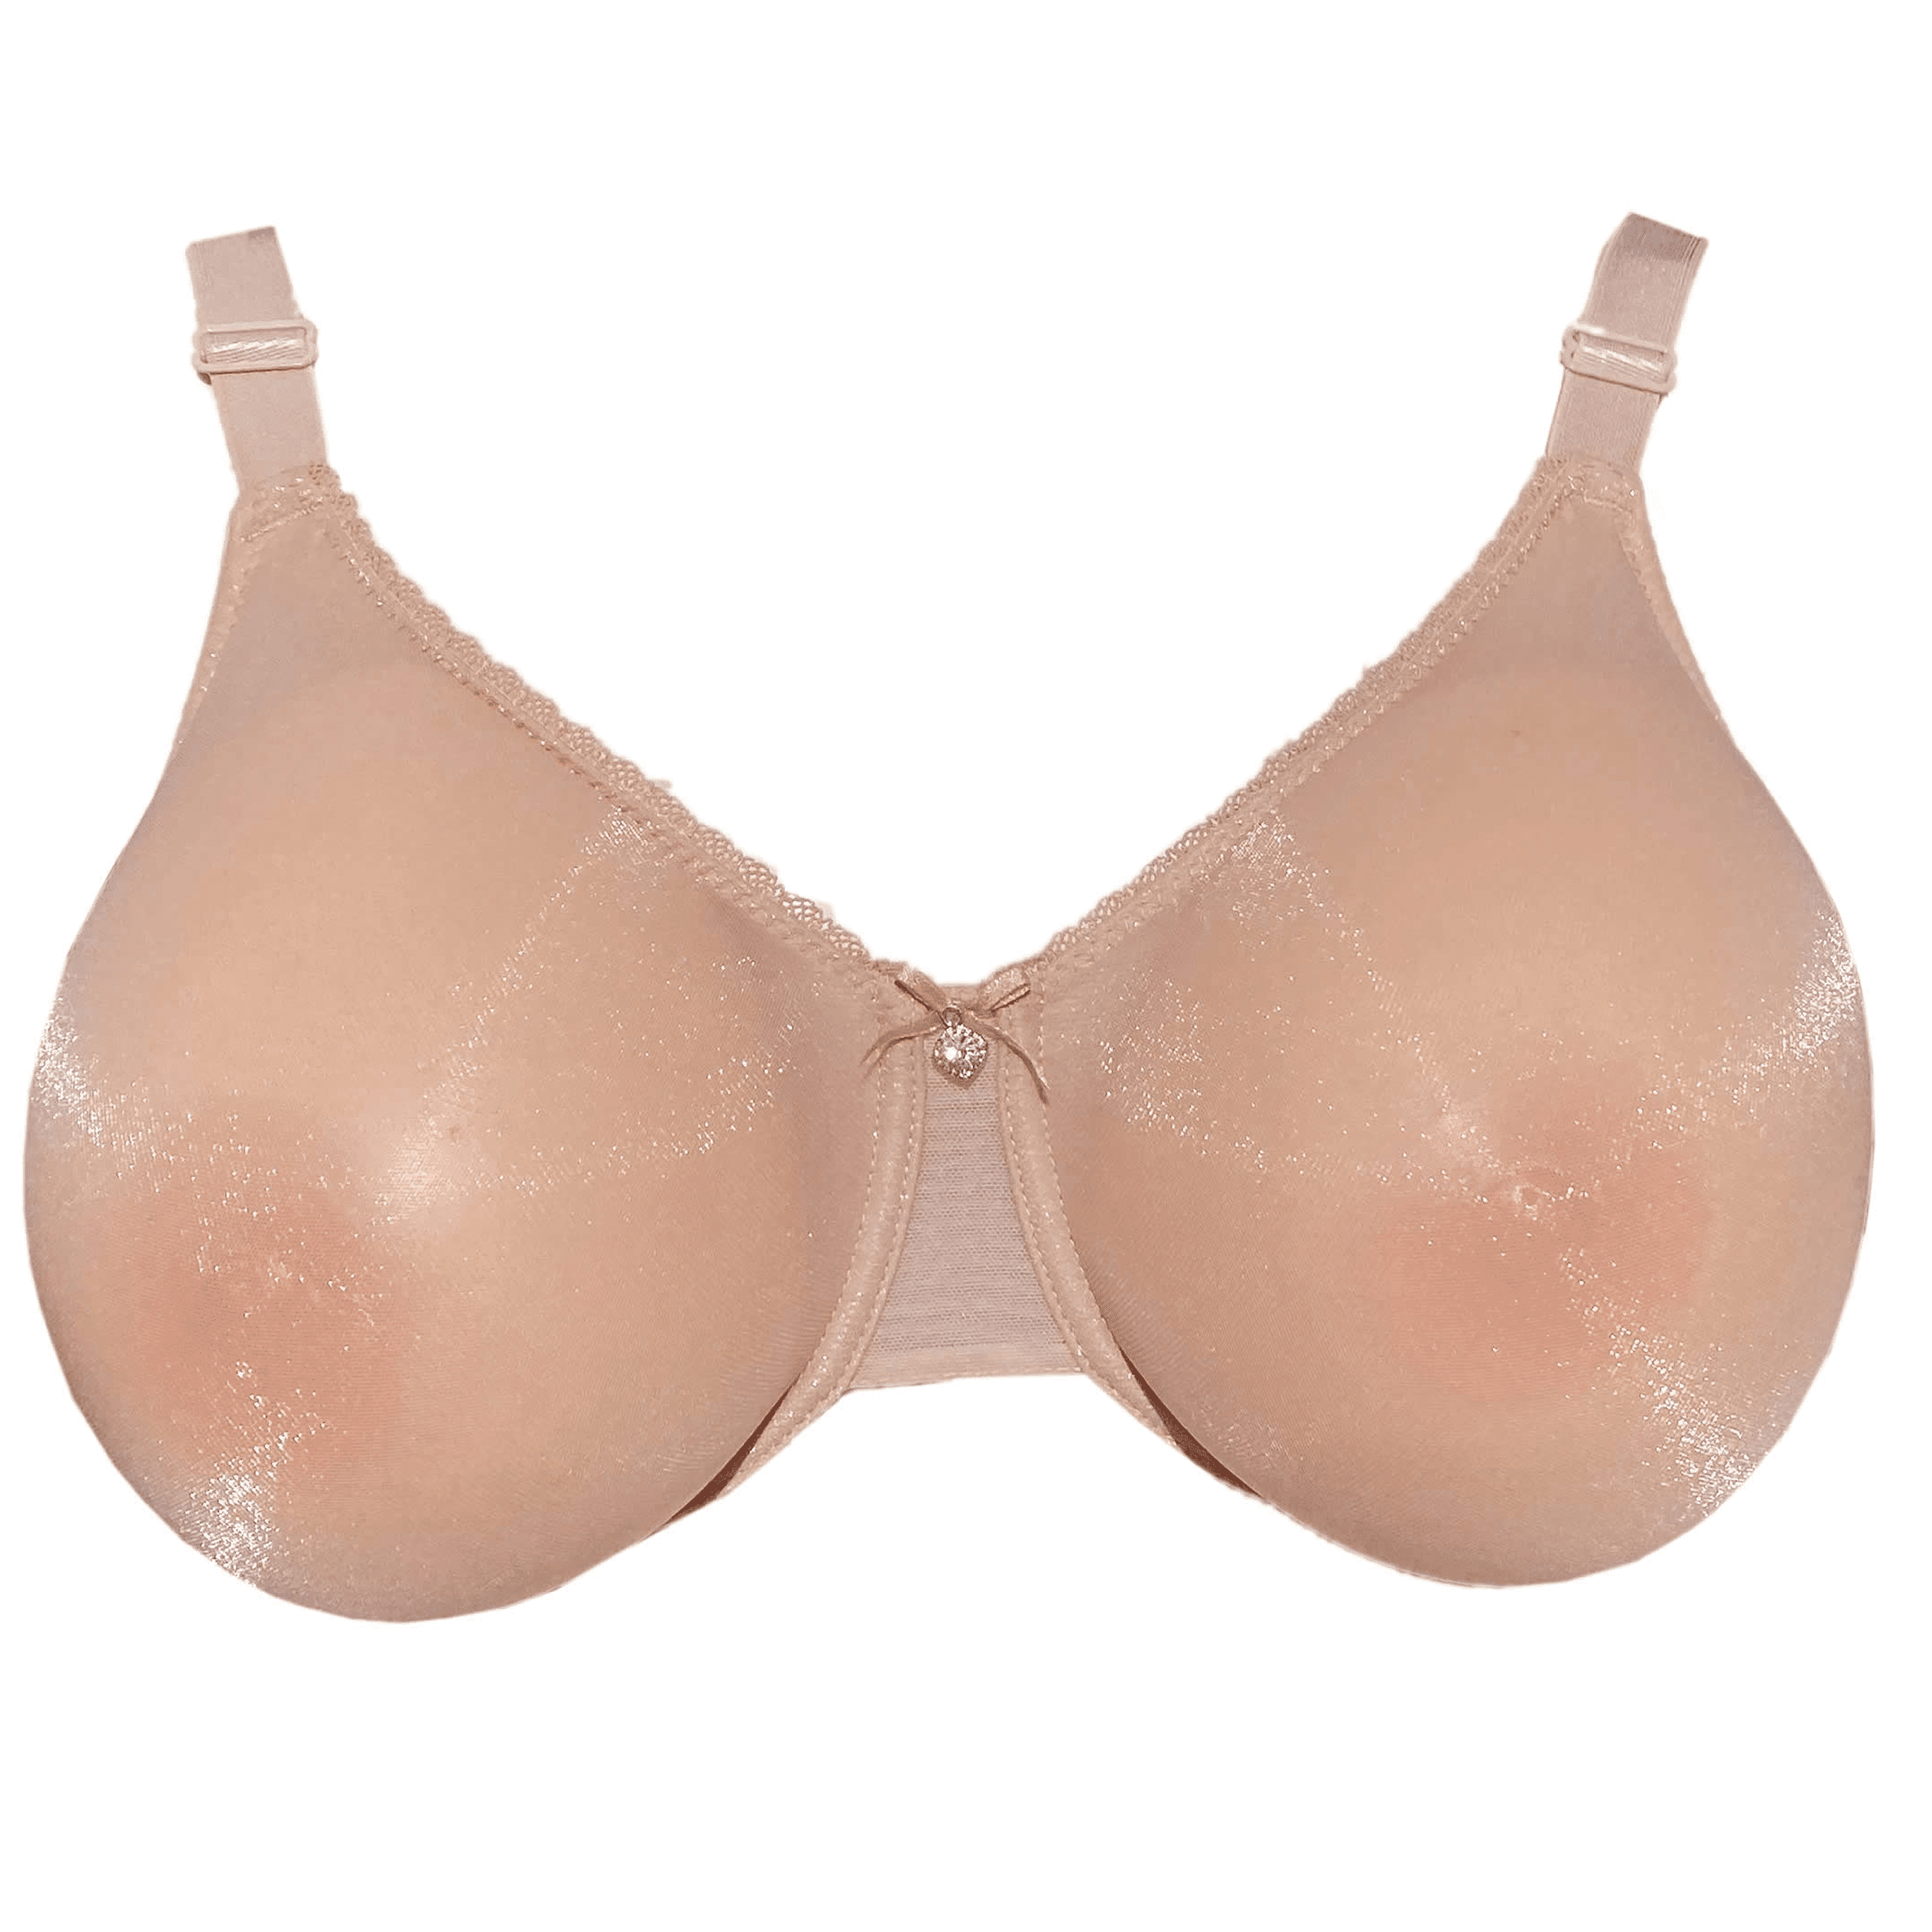 Mastectomy Pocket Bra Silicone Breast Full-freedom Front Zipper Comfort Bra  For Women Prosthesis Breast Cancer Breast Protheses - Bras - AliExpress